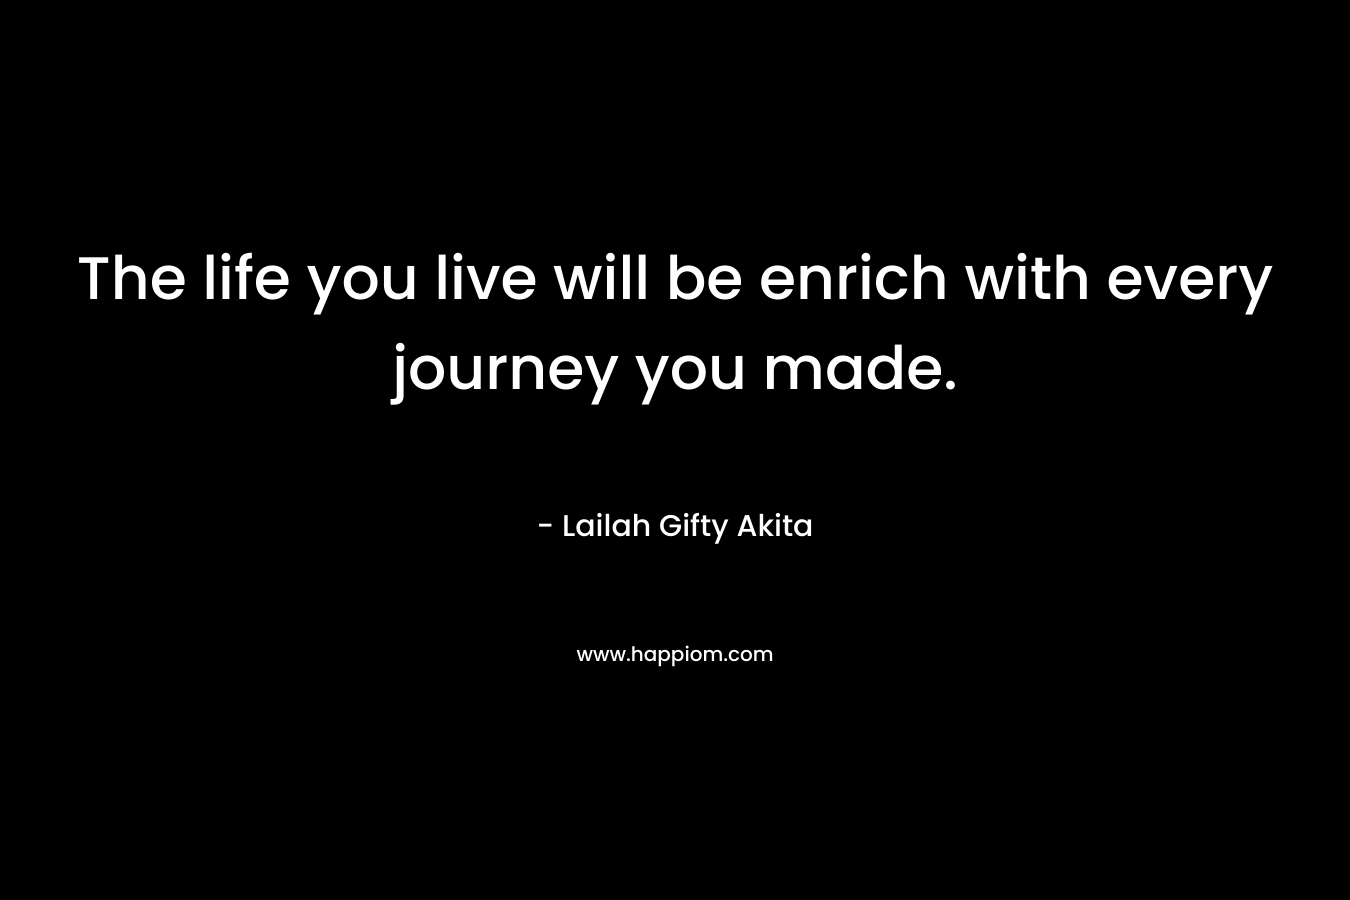 The life you live will be enrich with every journey you made. – Lailah Gifty Akita